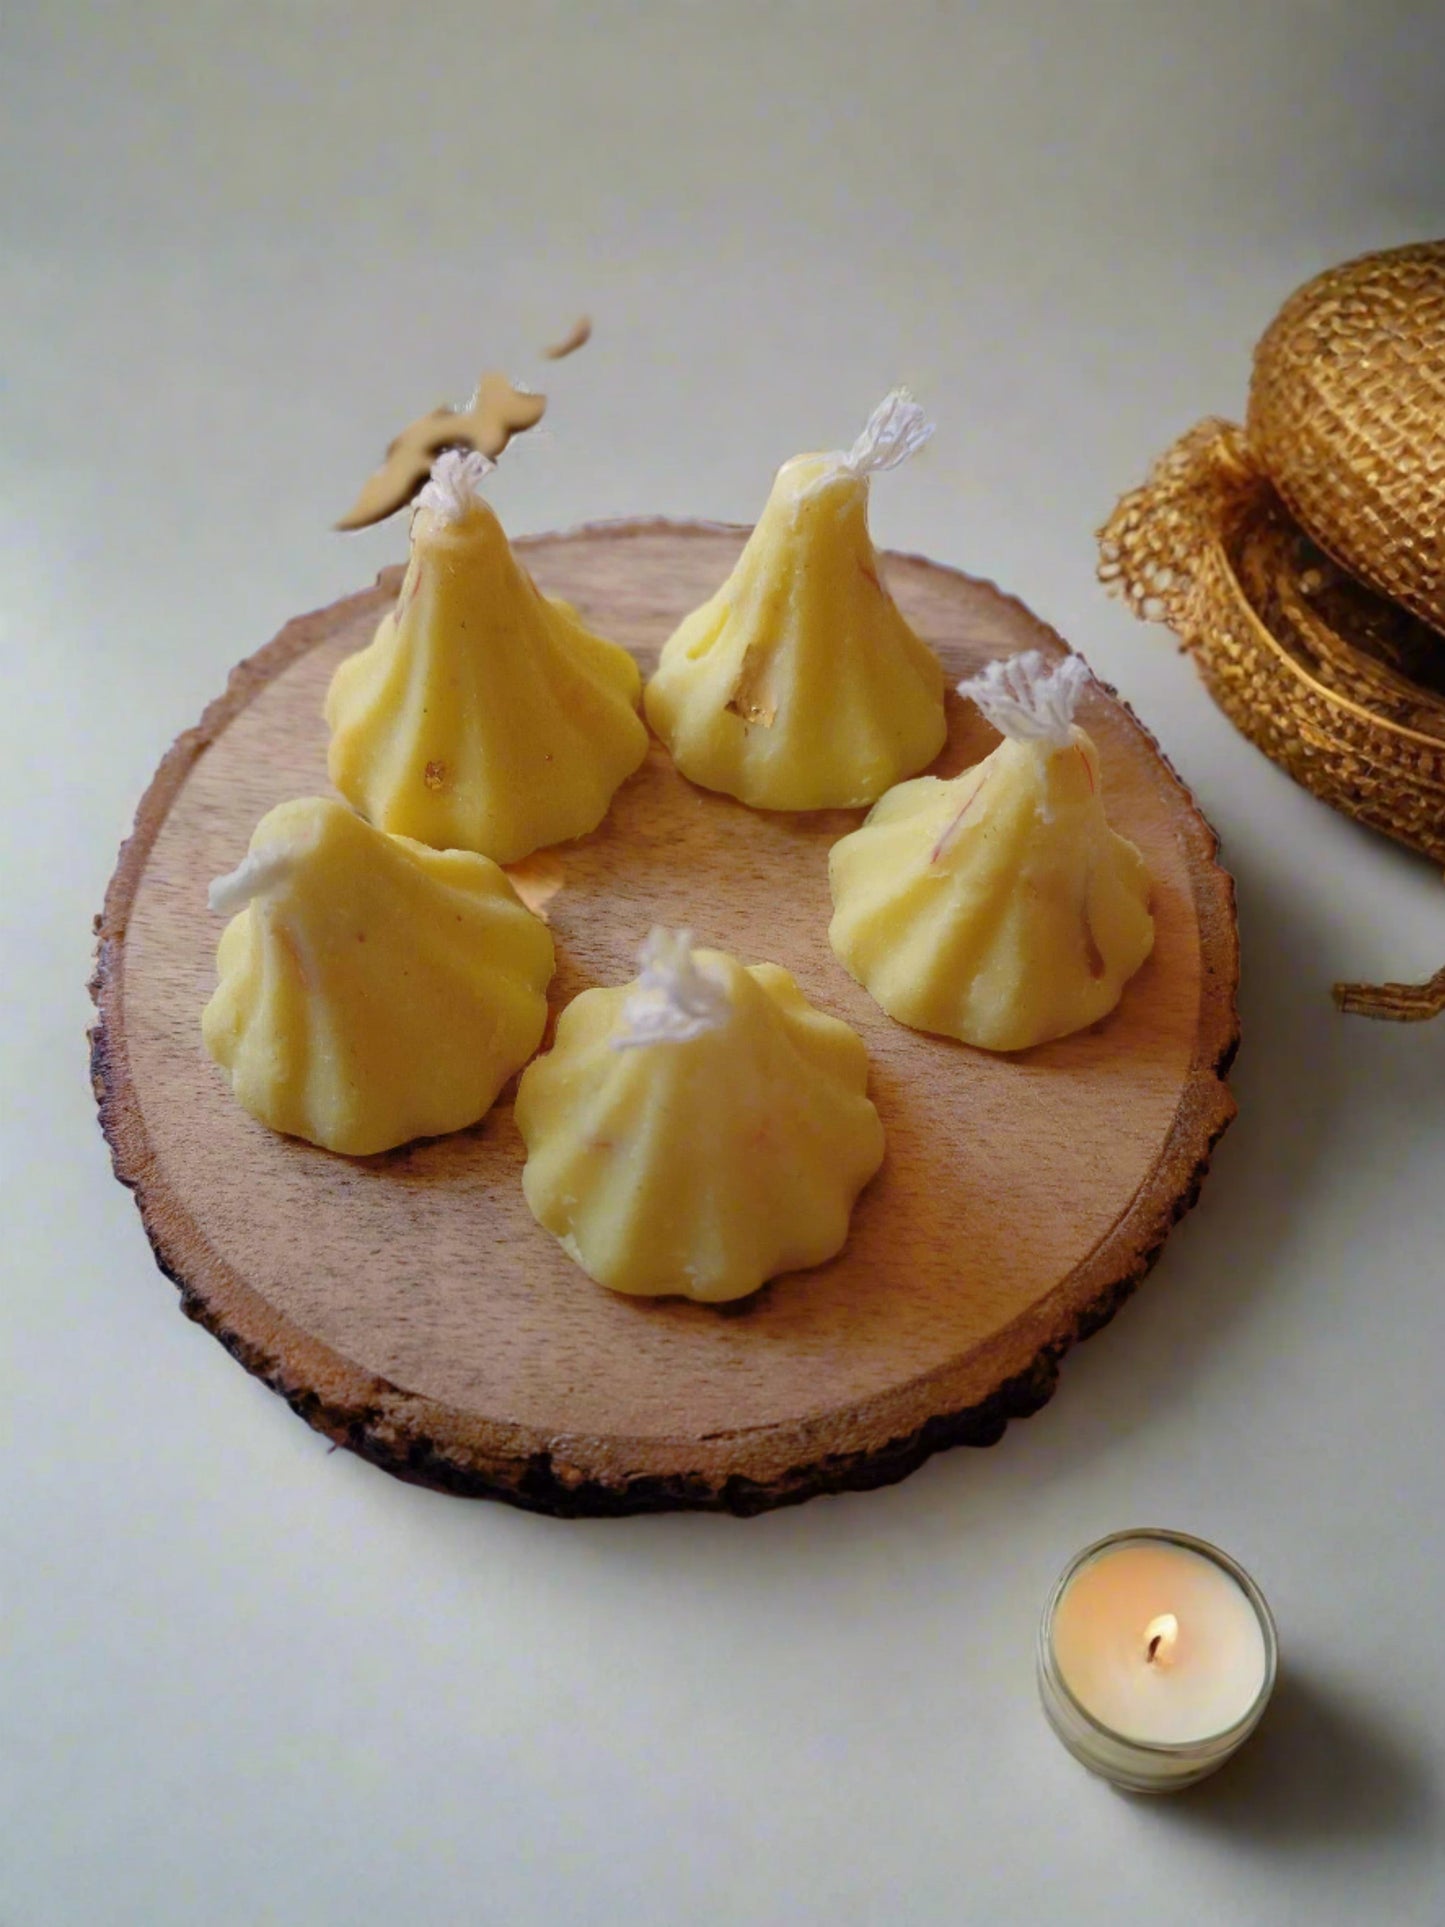 5 Modak shaped candles on wooden coaster with colorful props around